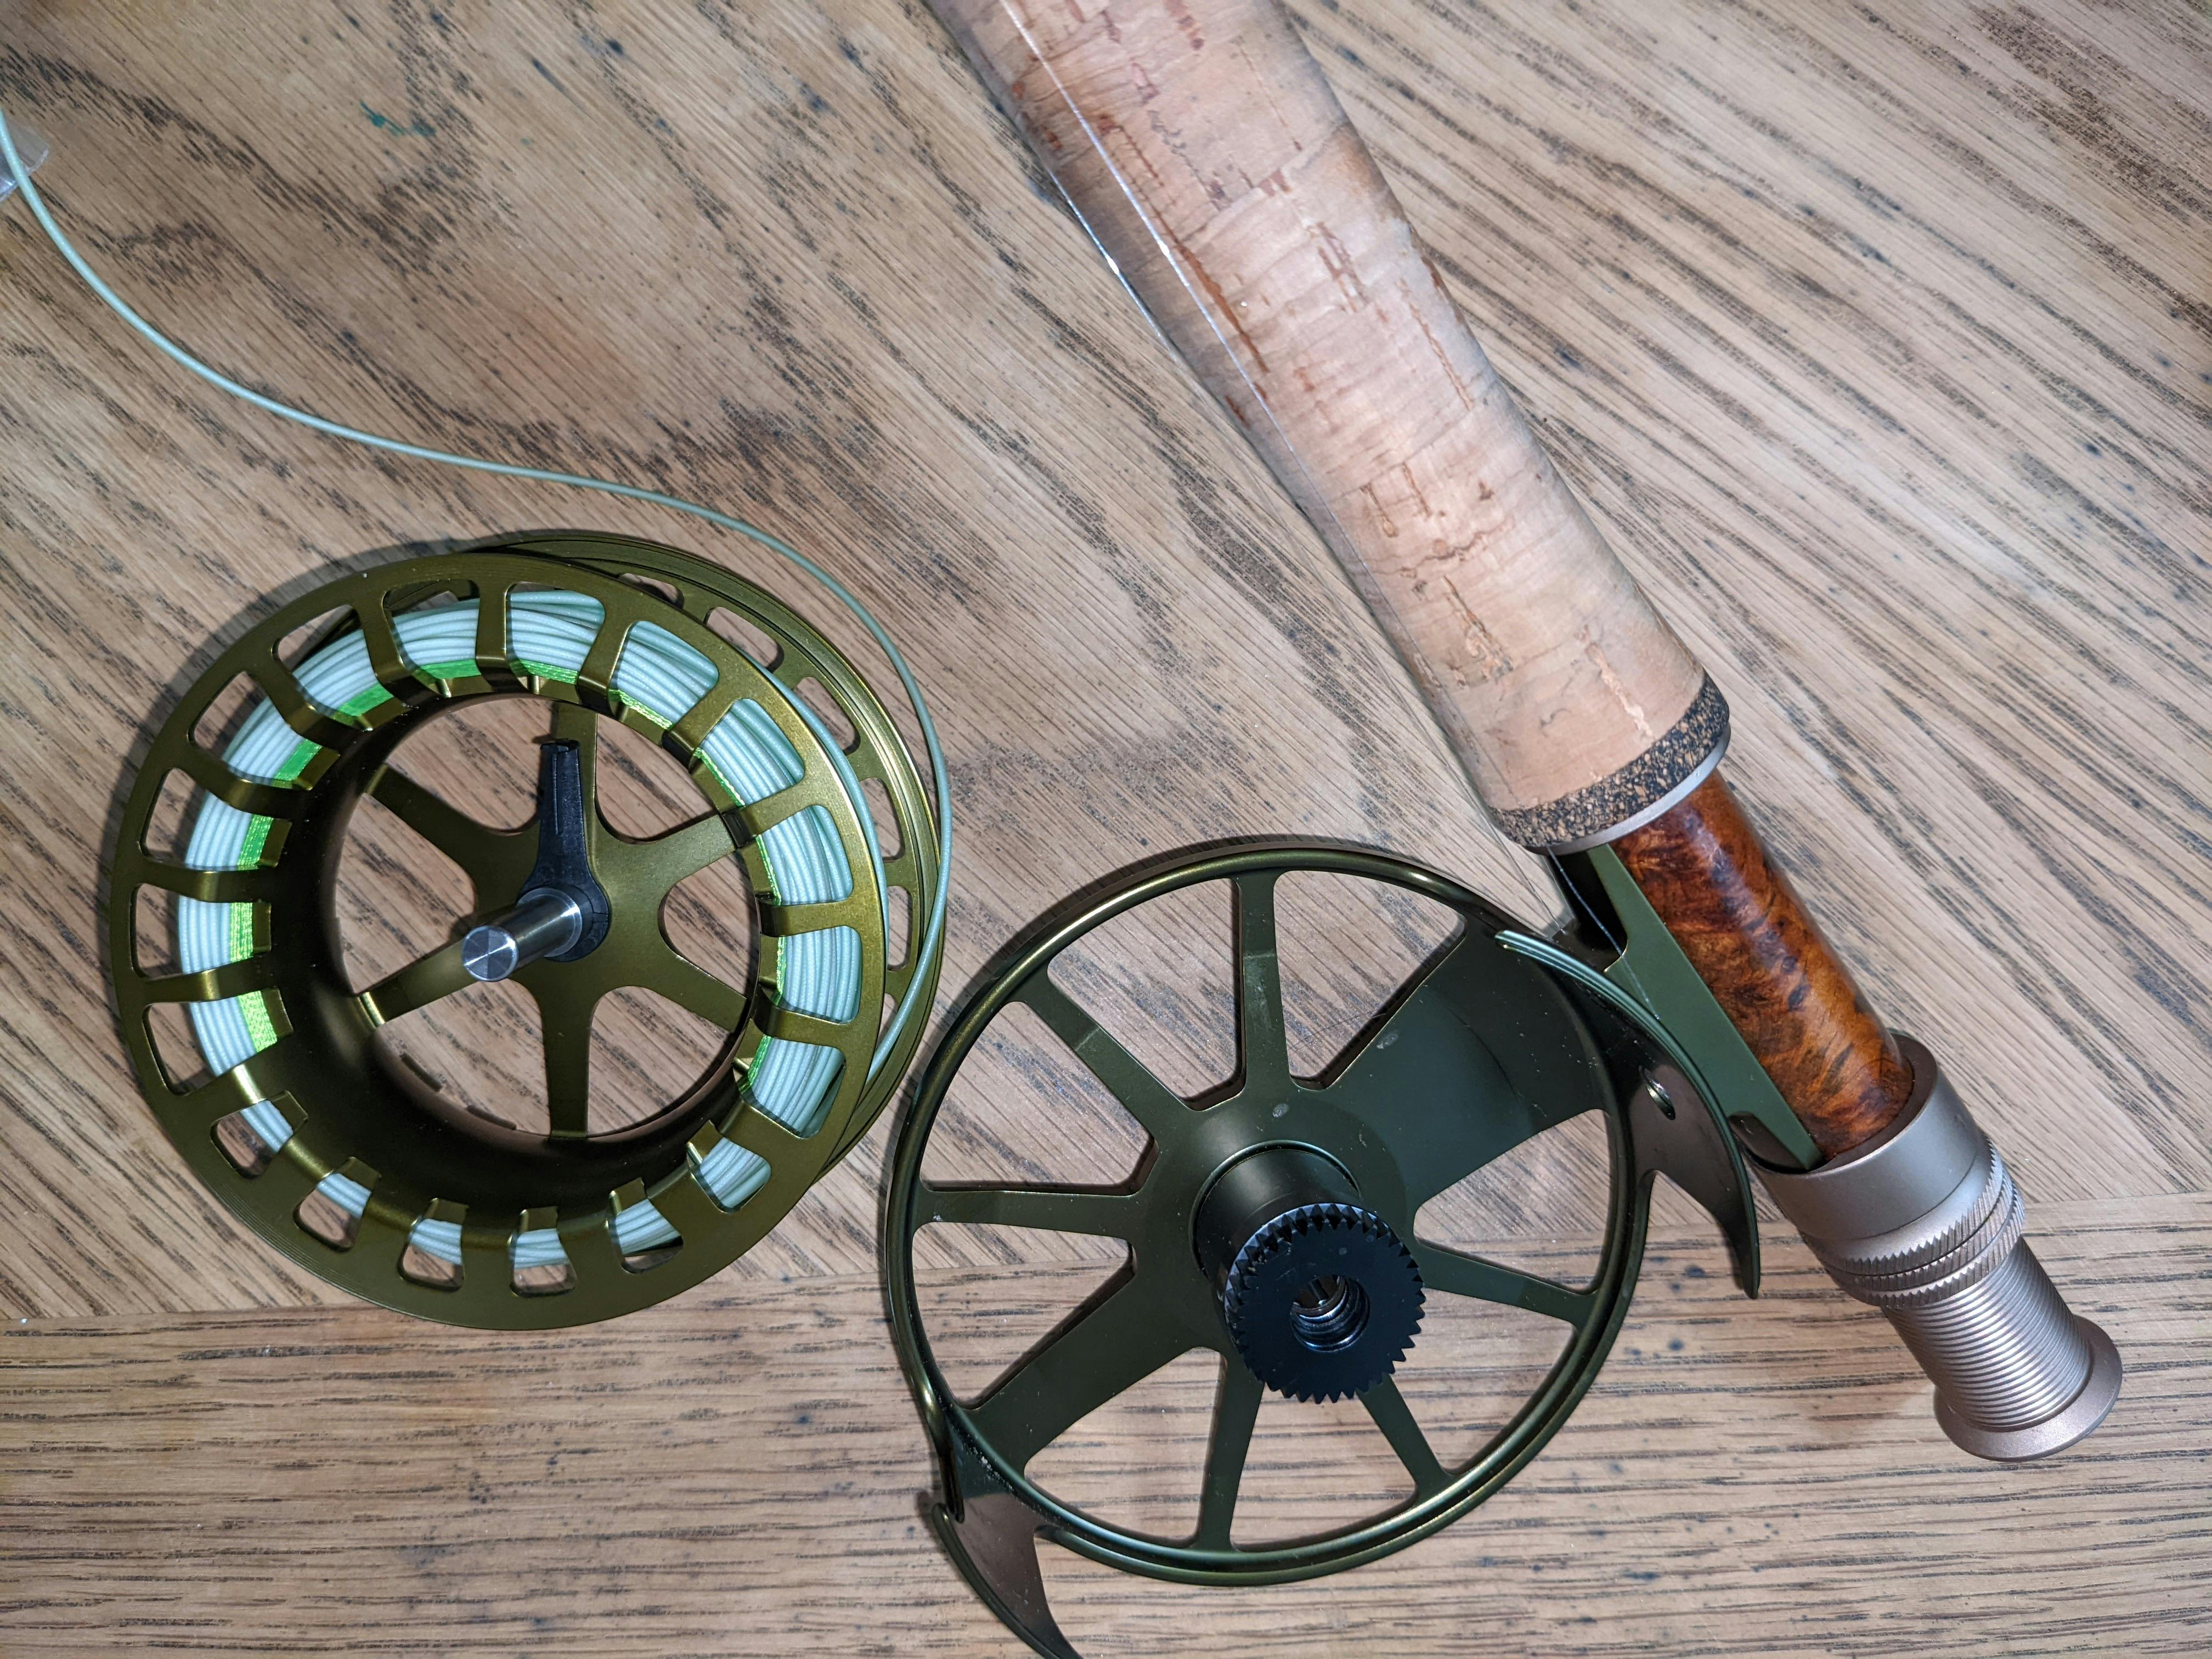 One Minute Review: Ross Reels Colorado - Limited Edition 